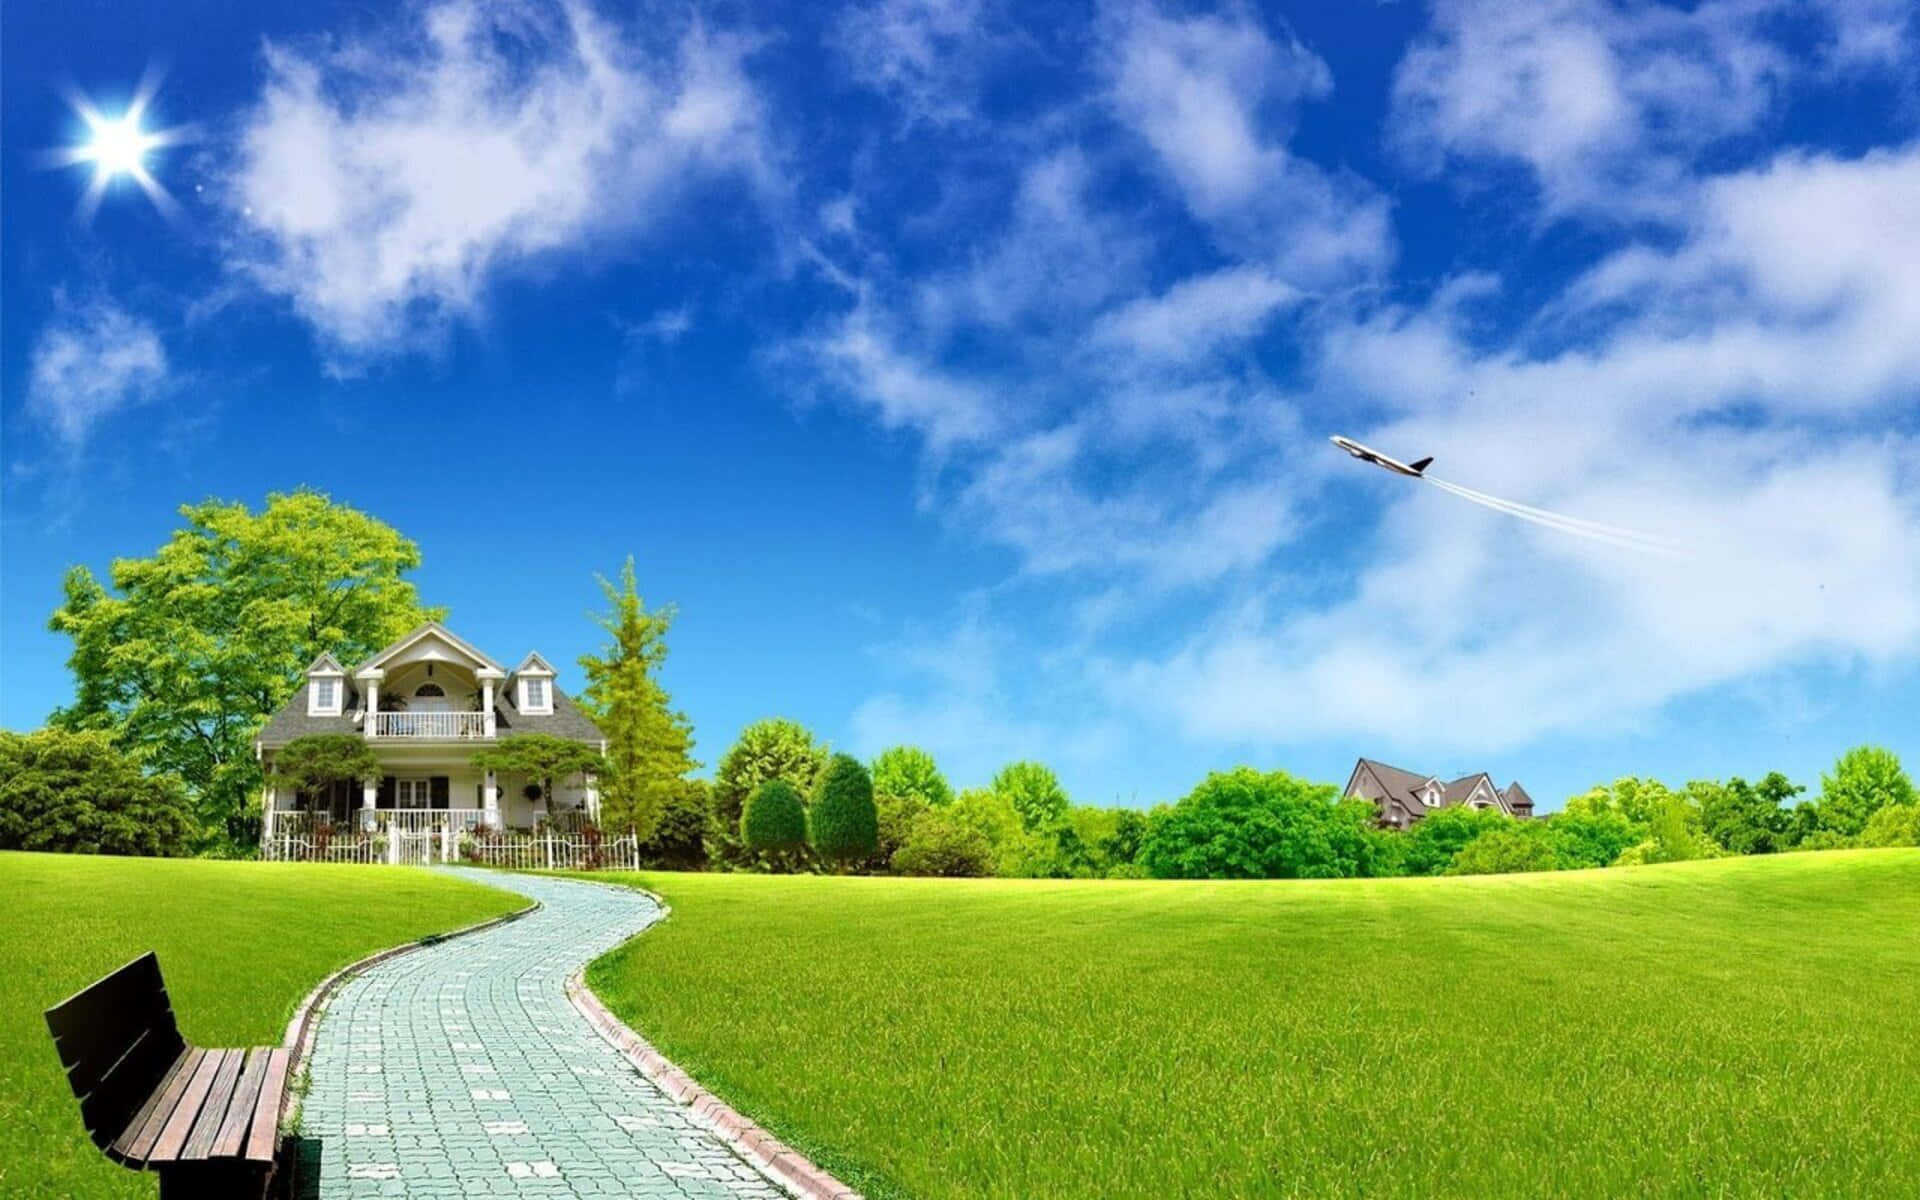 1080p Nature Background Front Yard